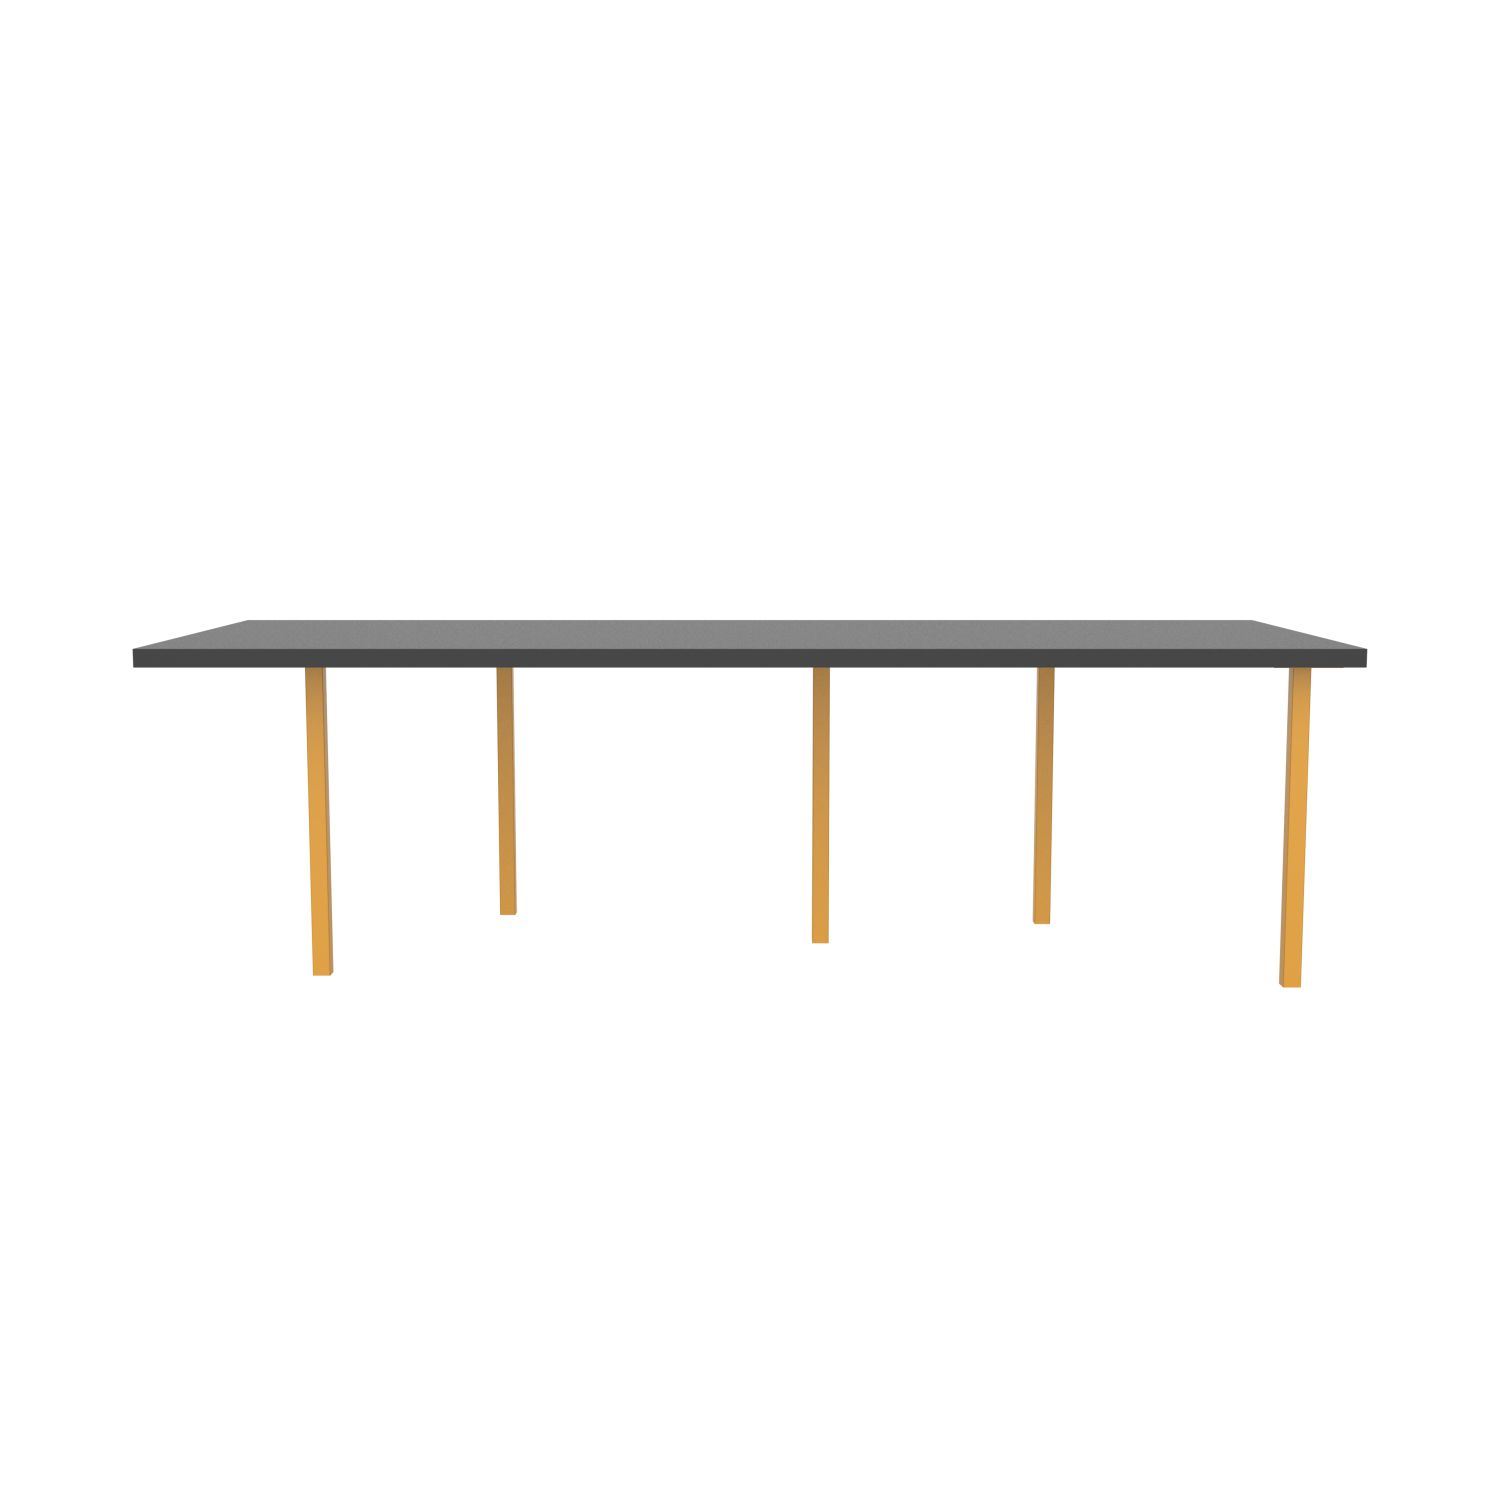 lensvelt bbrand table five fixed heigt 103x264 hpl black 50 mm price level 1 yellow ral1004